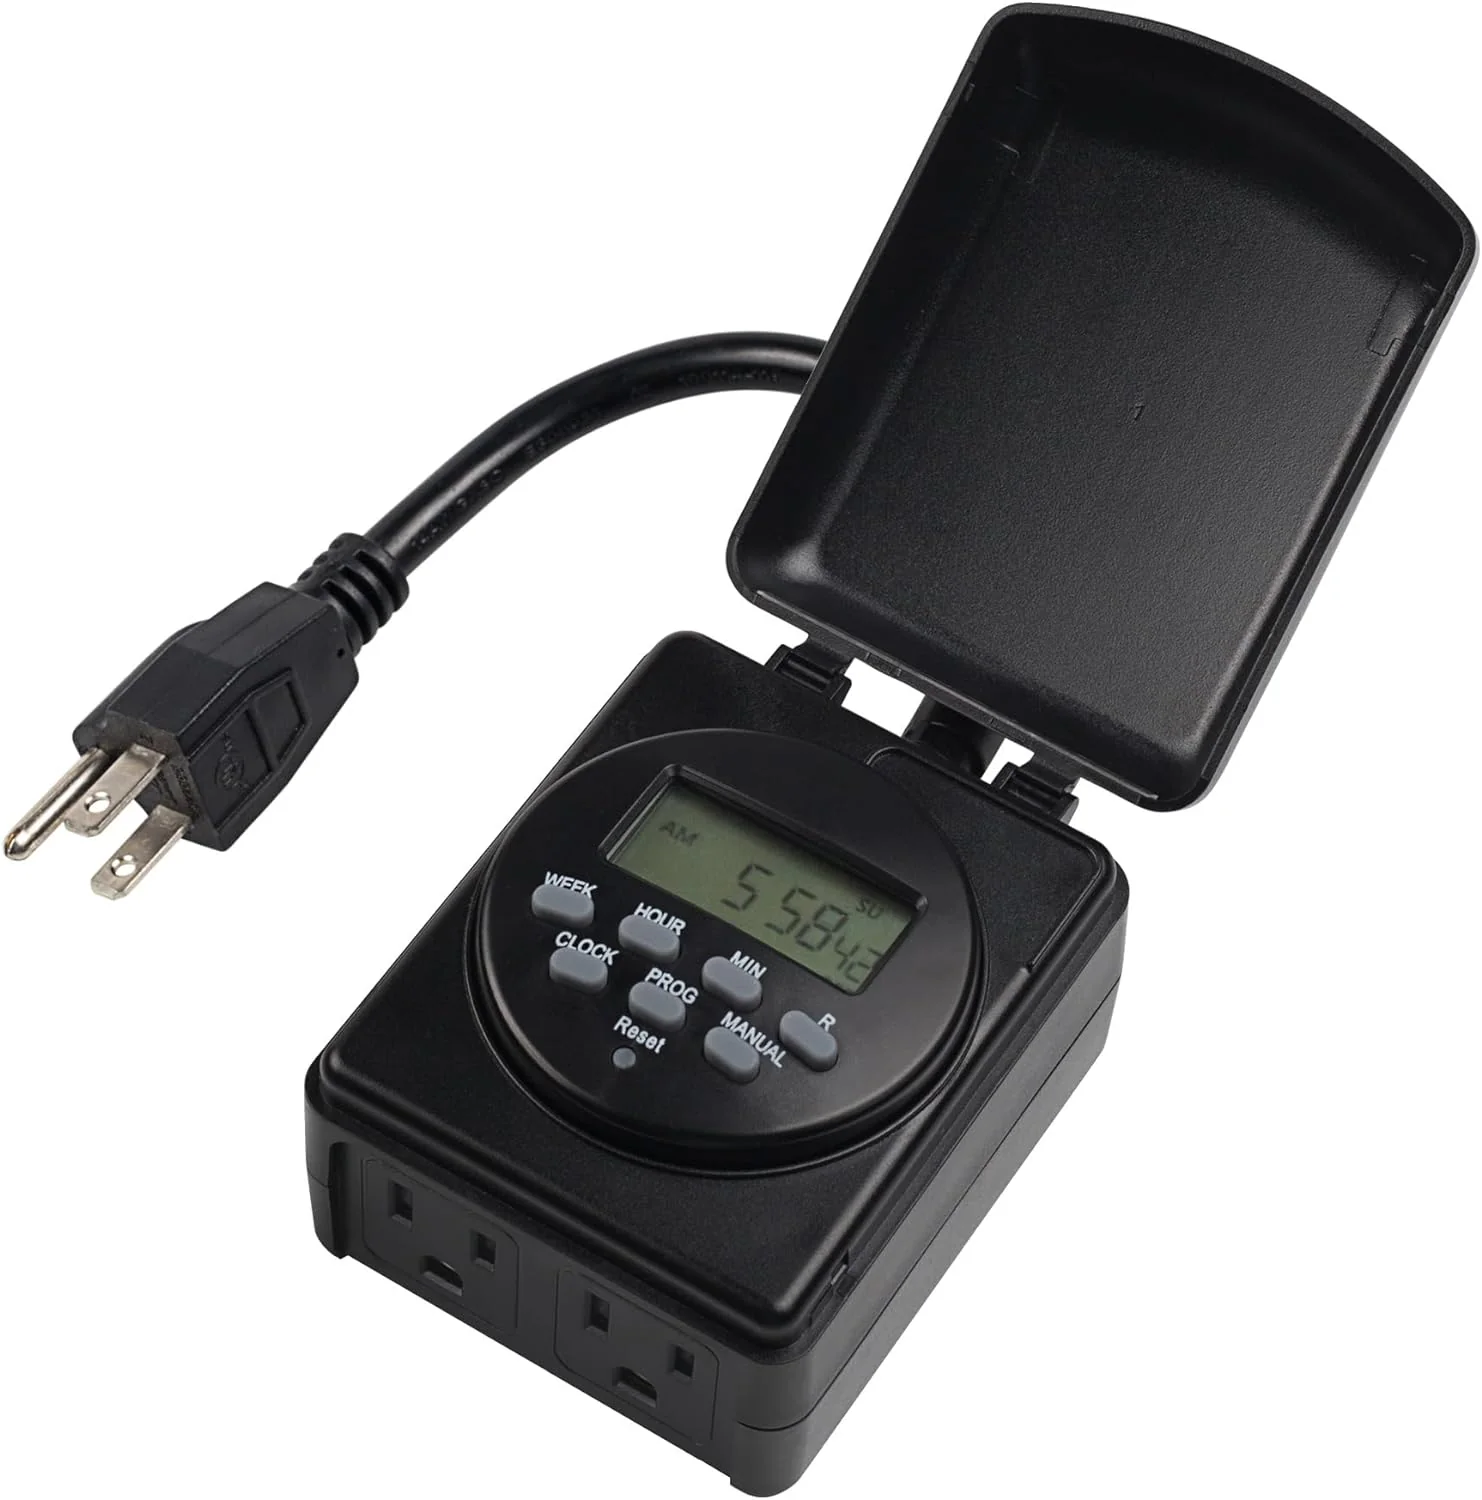 Streamline Your Outdoor Lighting with BN-LINK's 7 Day Outdoor Heavy Duty Digital Programmable Timer